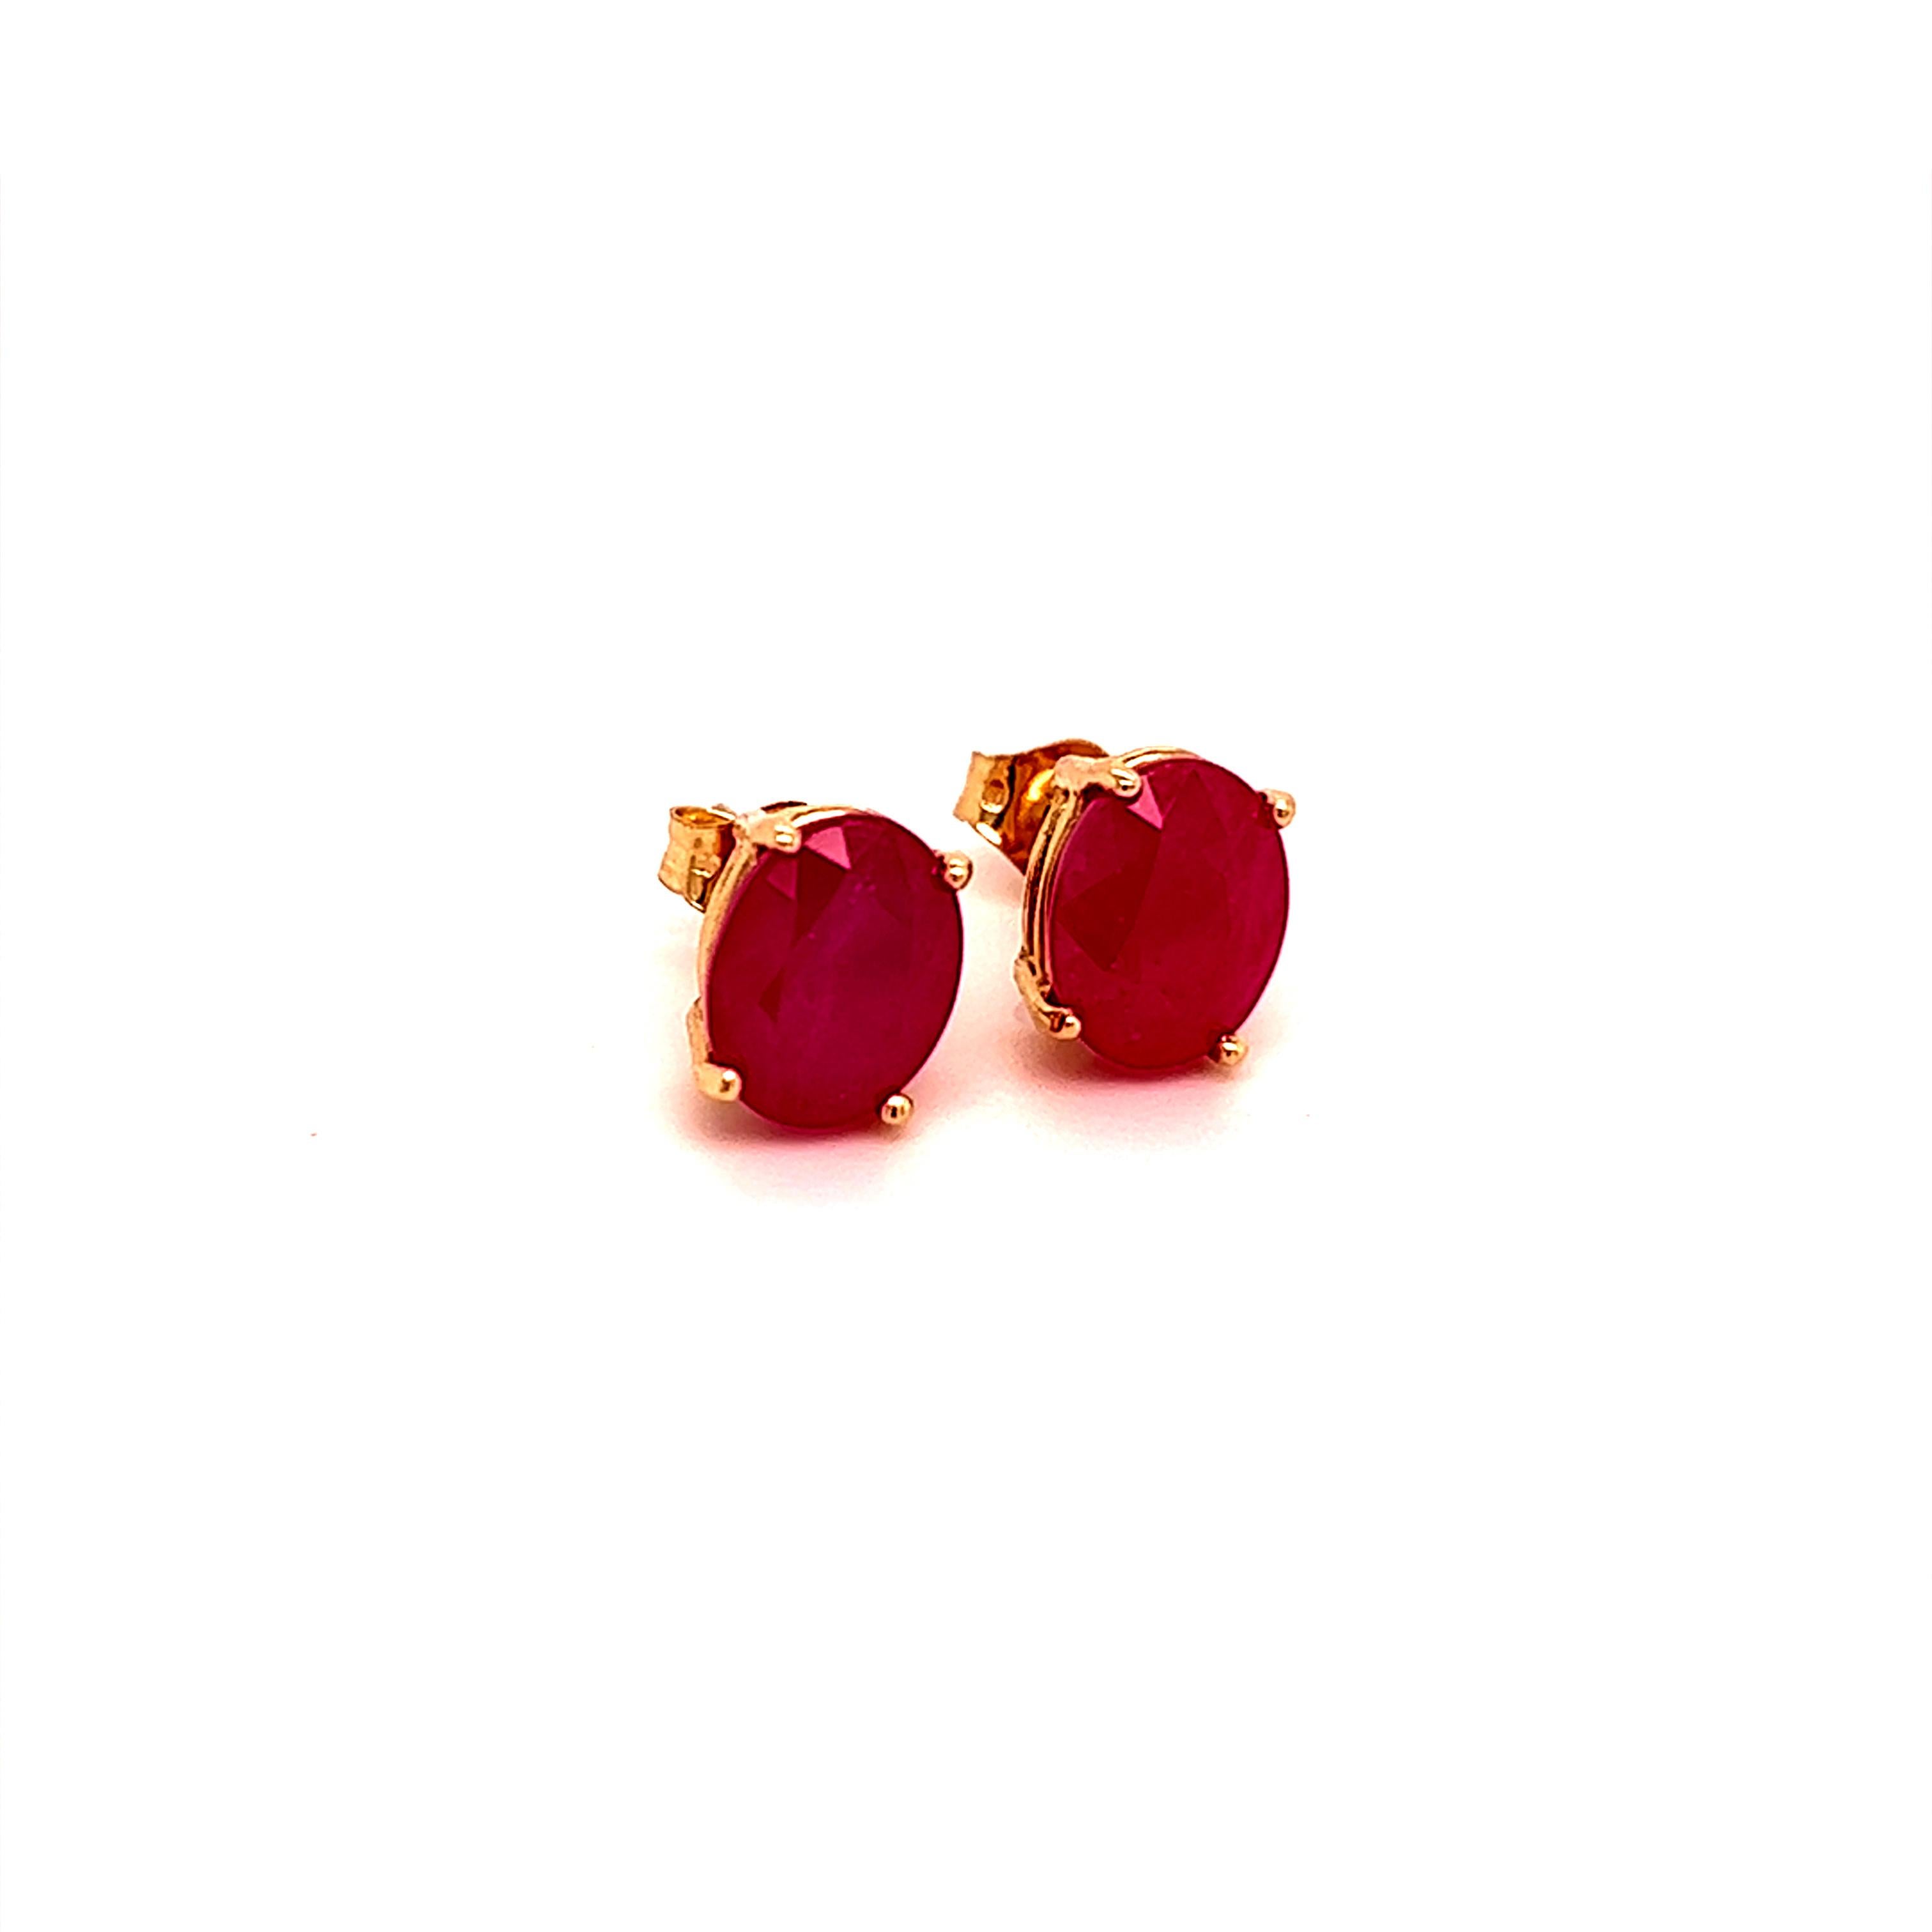 Oval Shape Ruby Stud Earrings 14k Y Gold 4.03 TCW Certified $3,590 211163

This is a Unique Custom Made Glamorous Piece of Jewelry!

Nothing says, “I Love you” more than Diamonds and Pearls!

These Ruby earrings have been Certified, Inspected, and